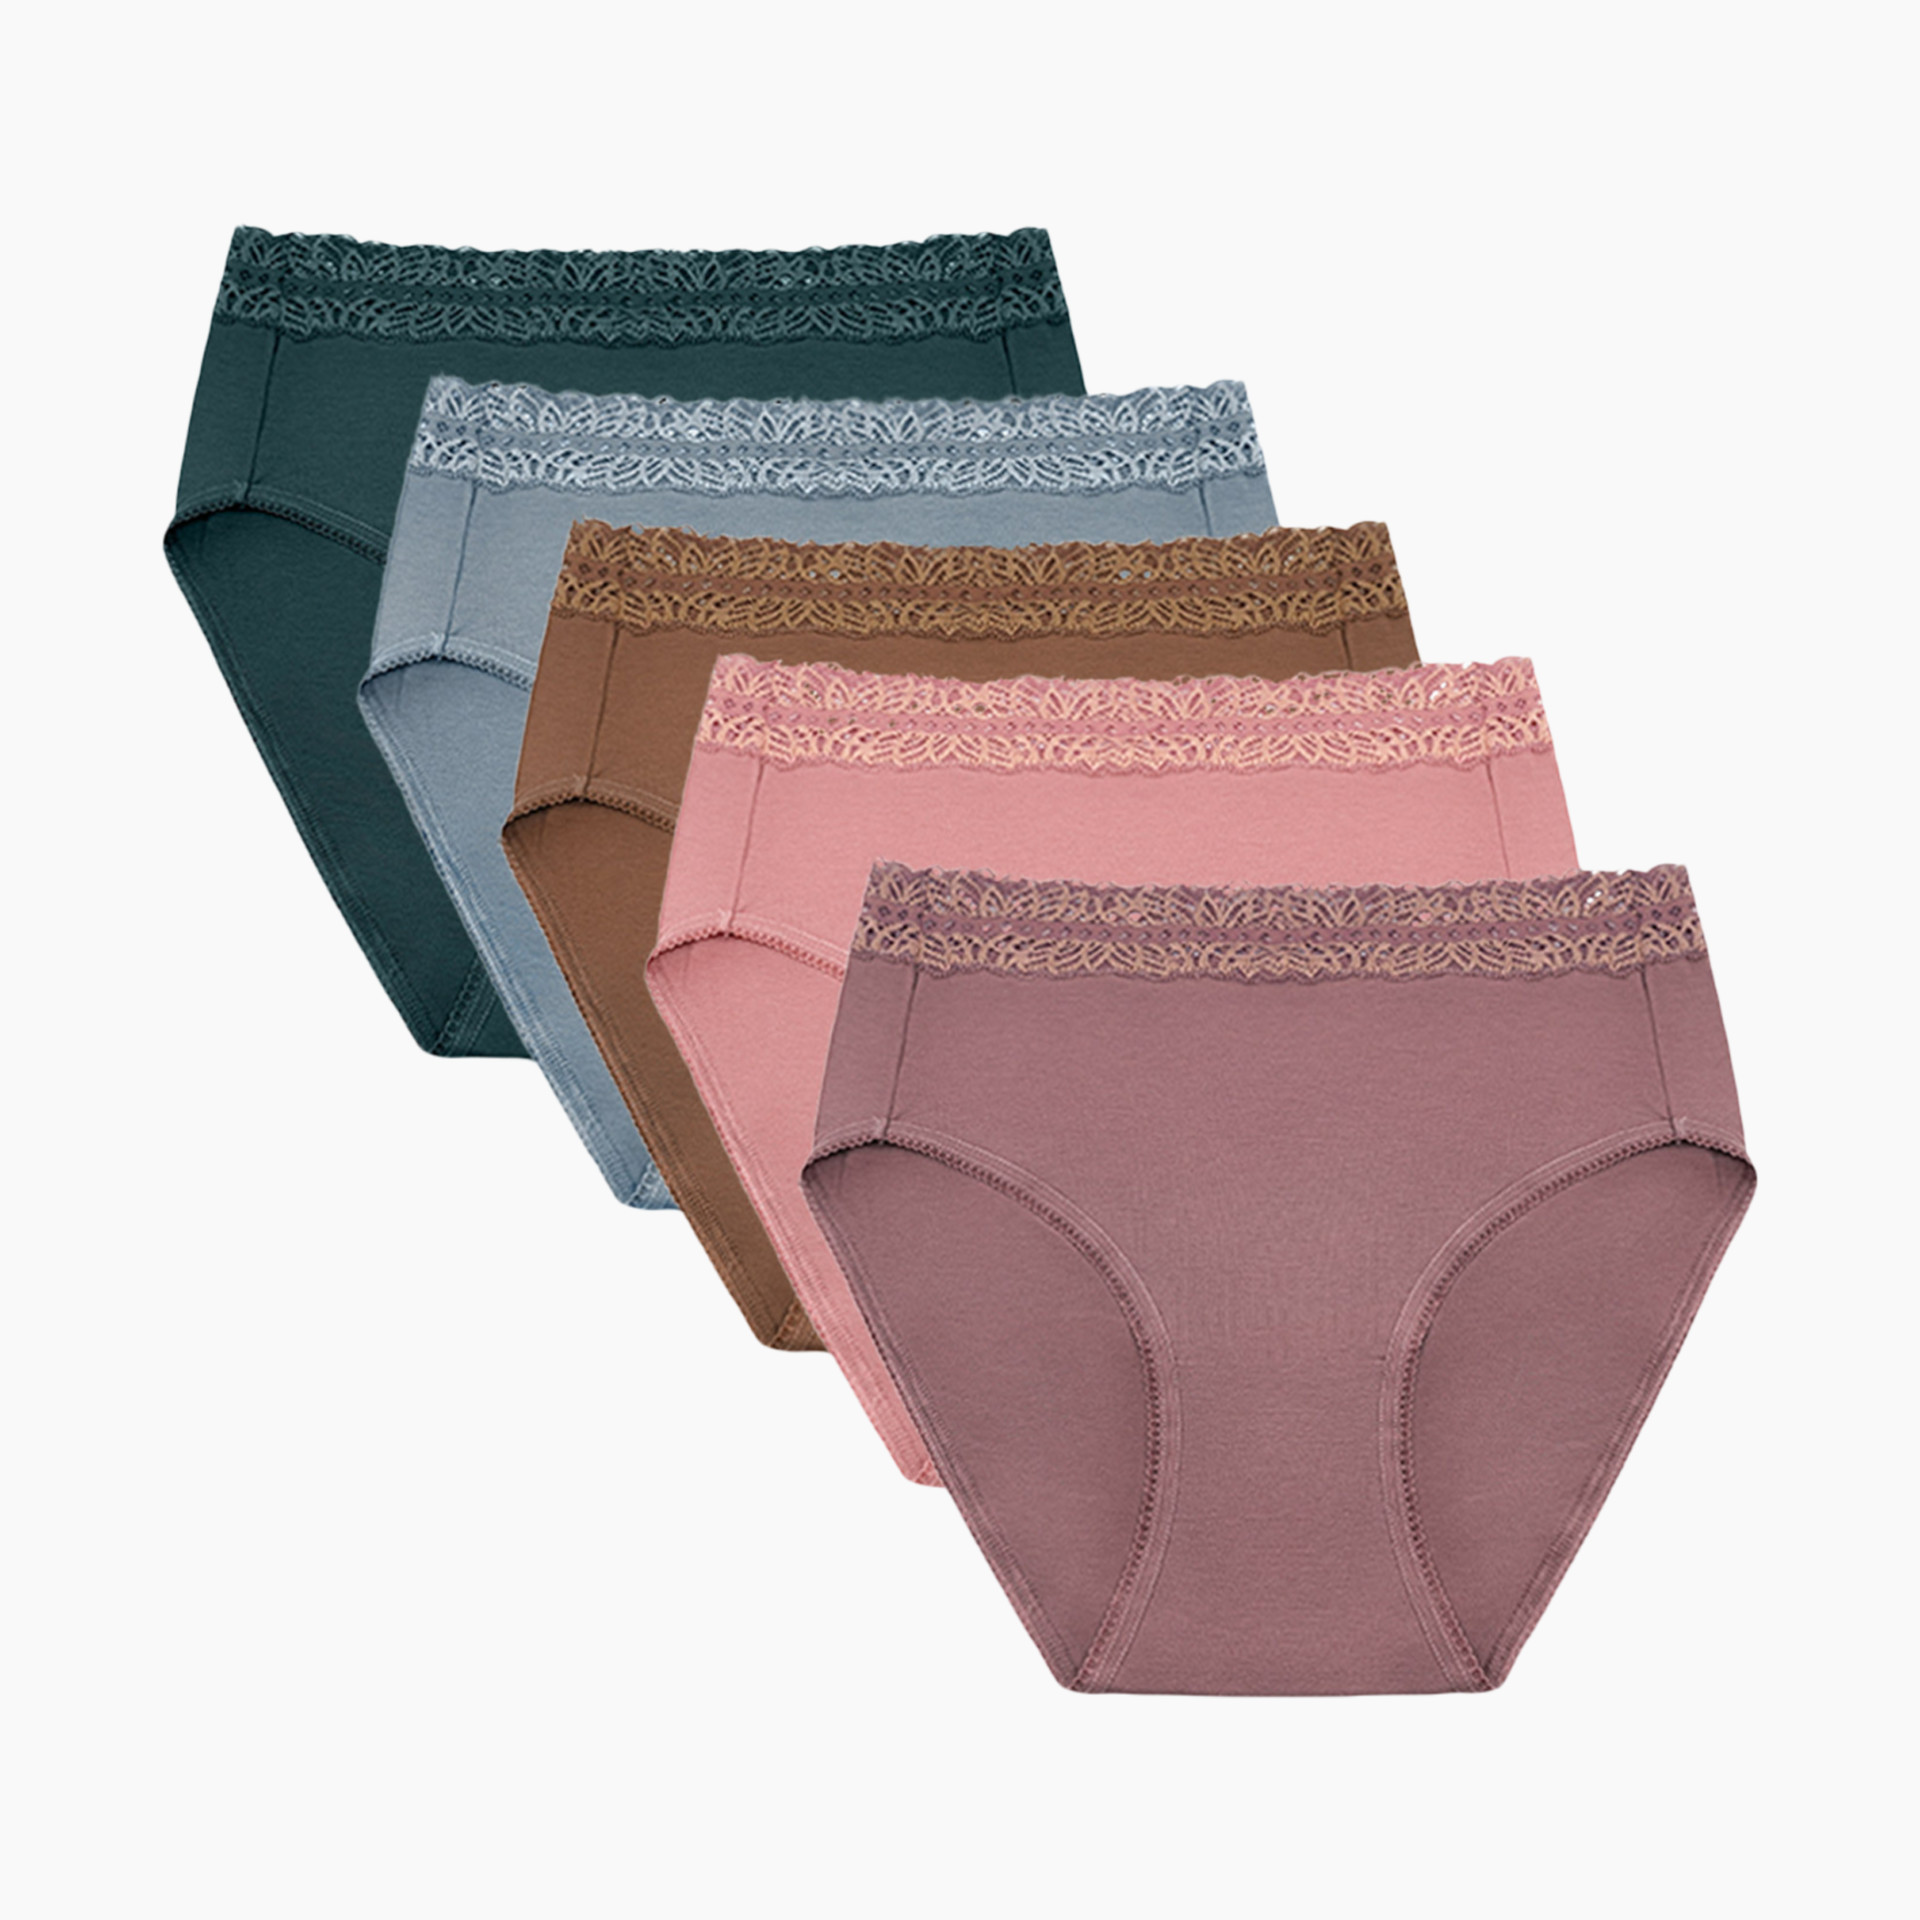 Kindred Bravely High Waist Postpartum Underwear & C-Section Recovery  Maternity Panties (5 Pack) - Neutrals, Xx-Large